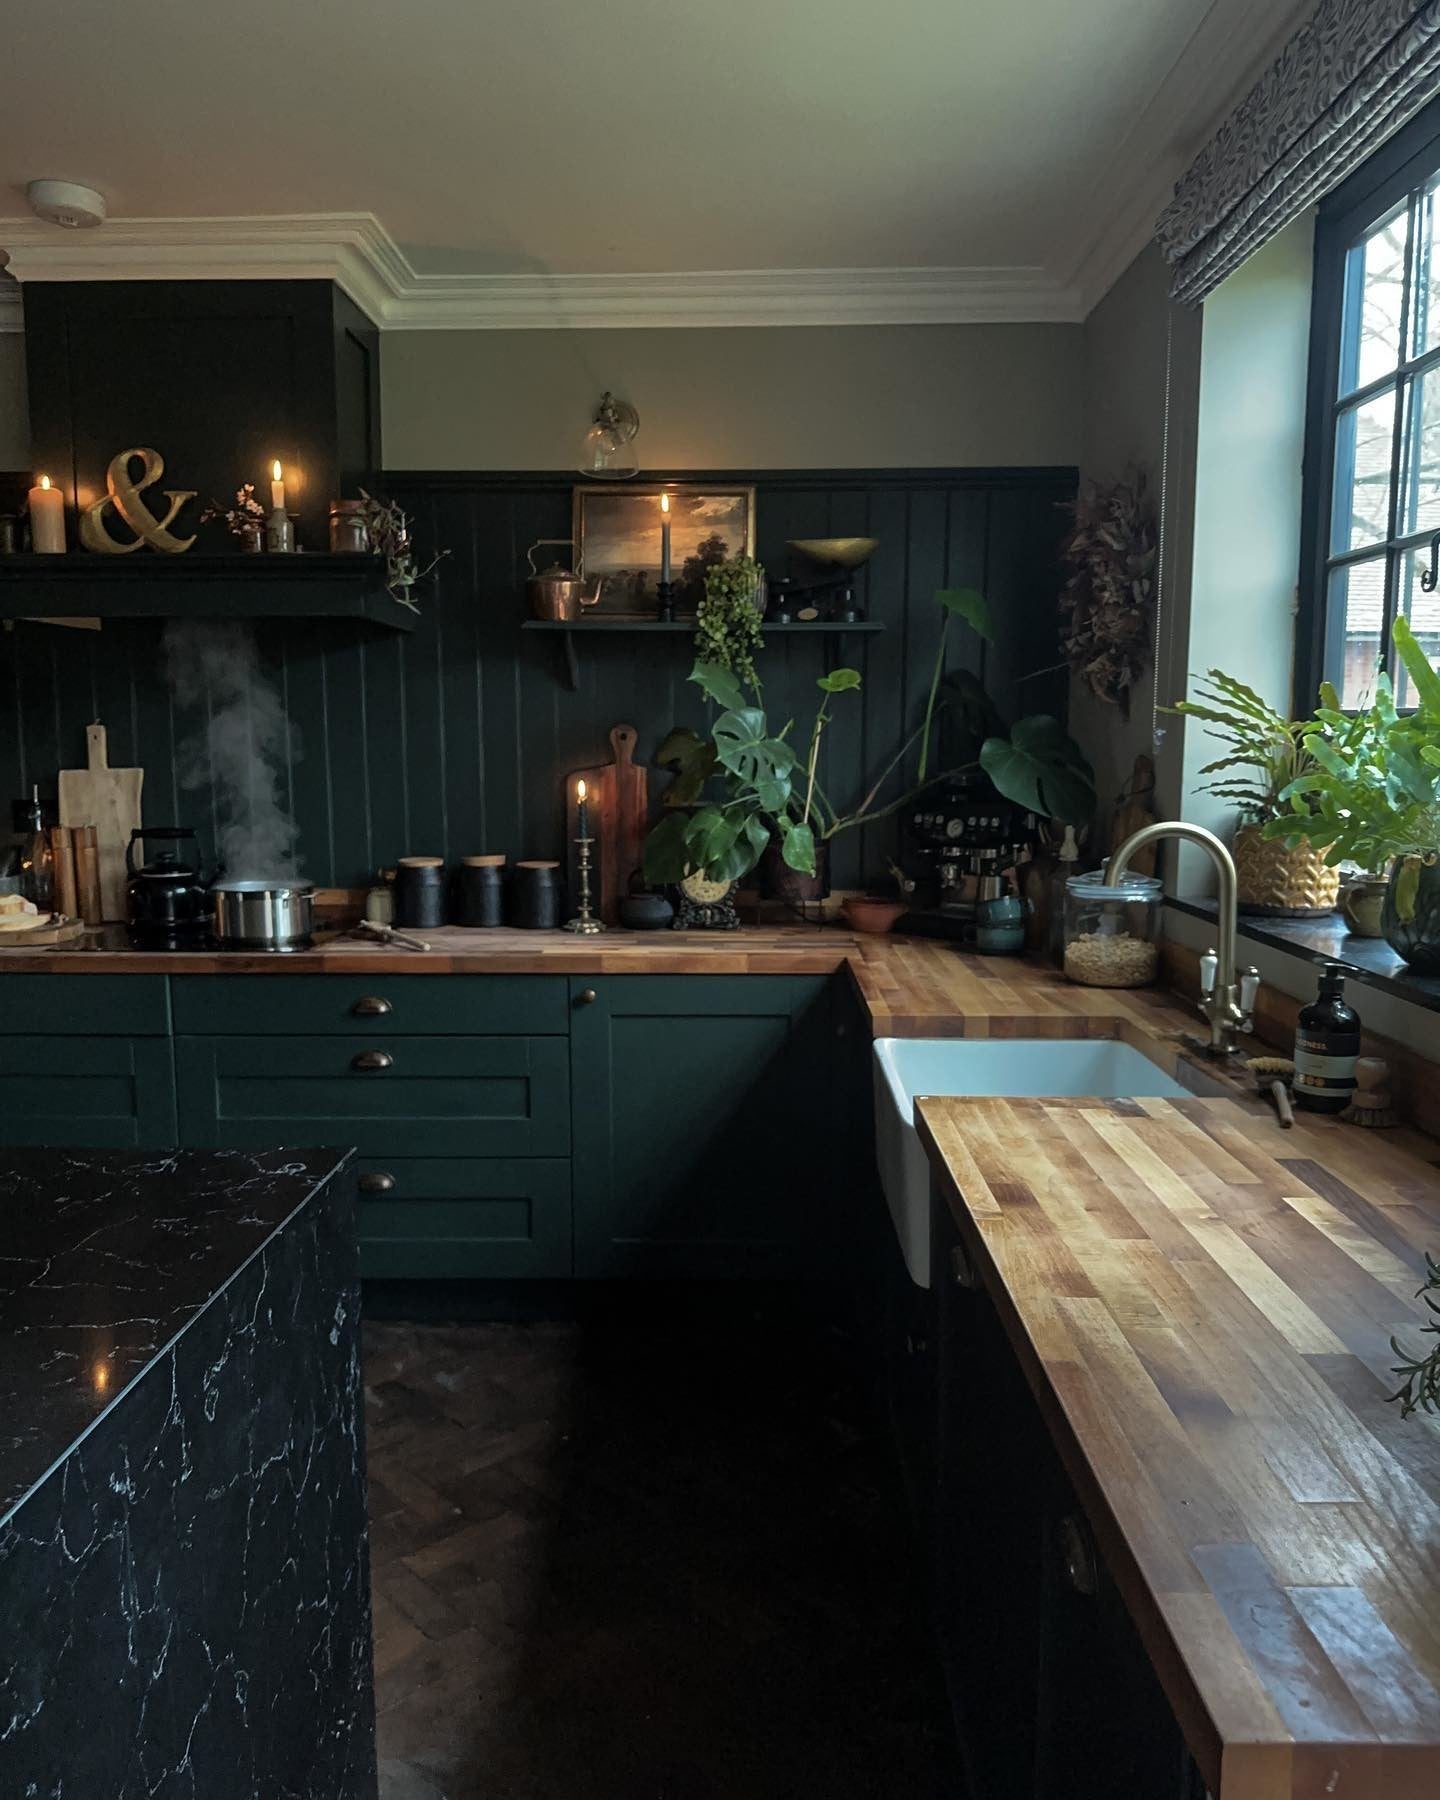 A dark academia aesthetic kitchen with wooden worktops and cabinetry painted in dark green